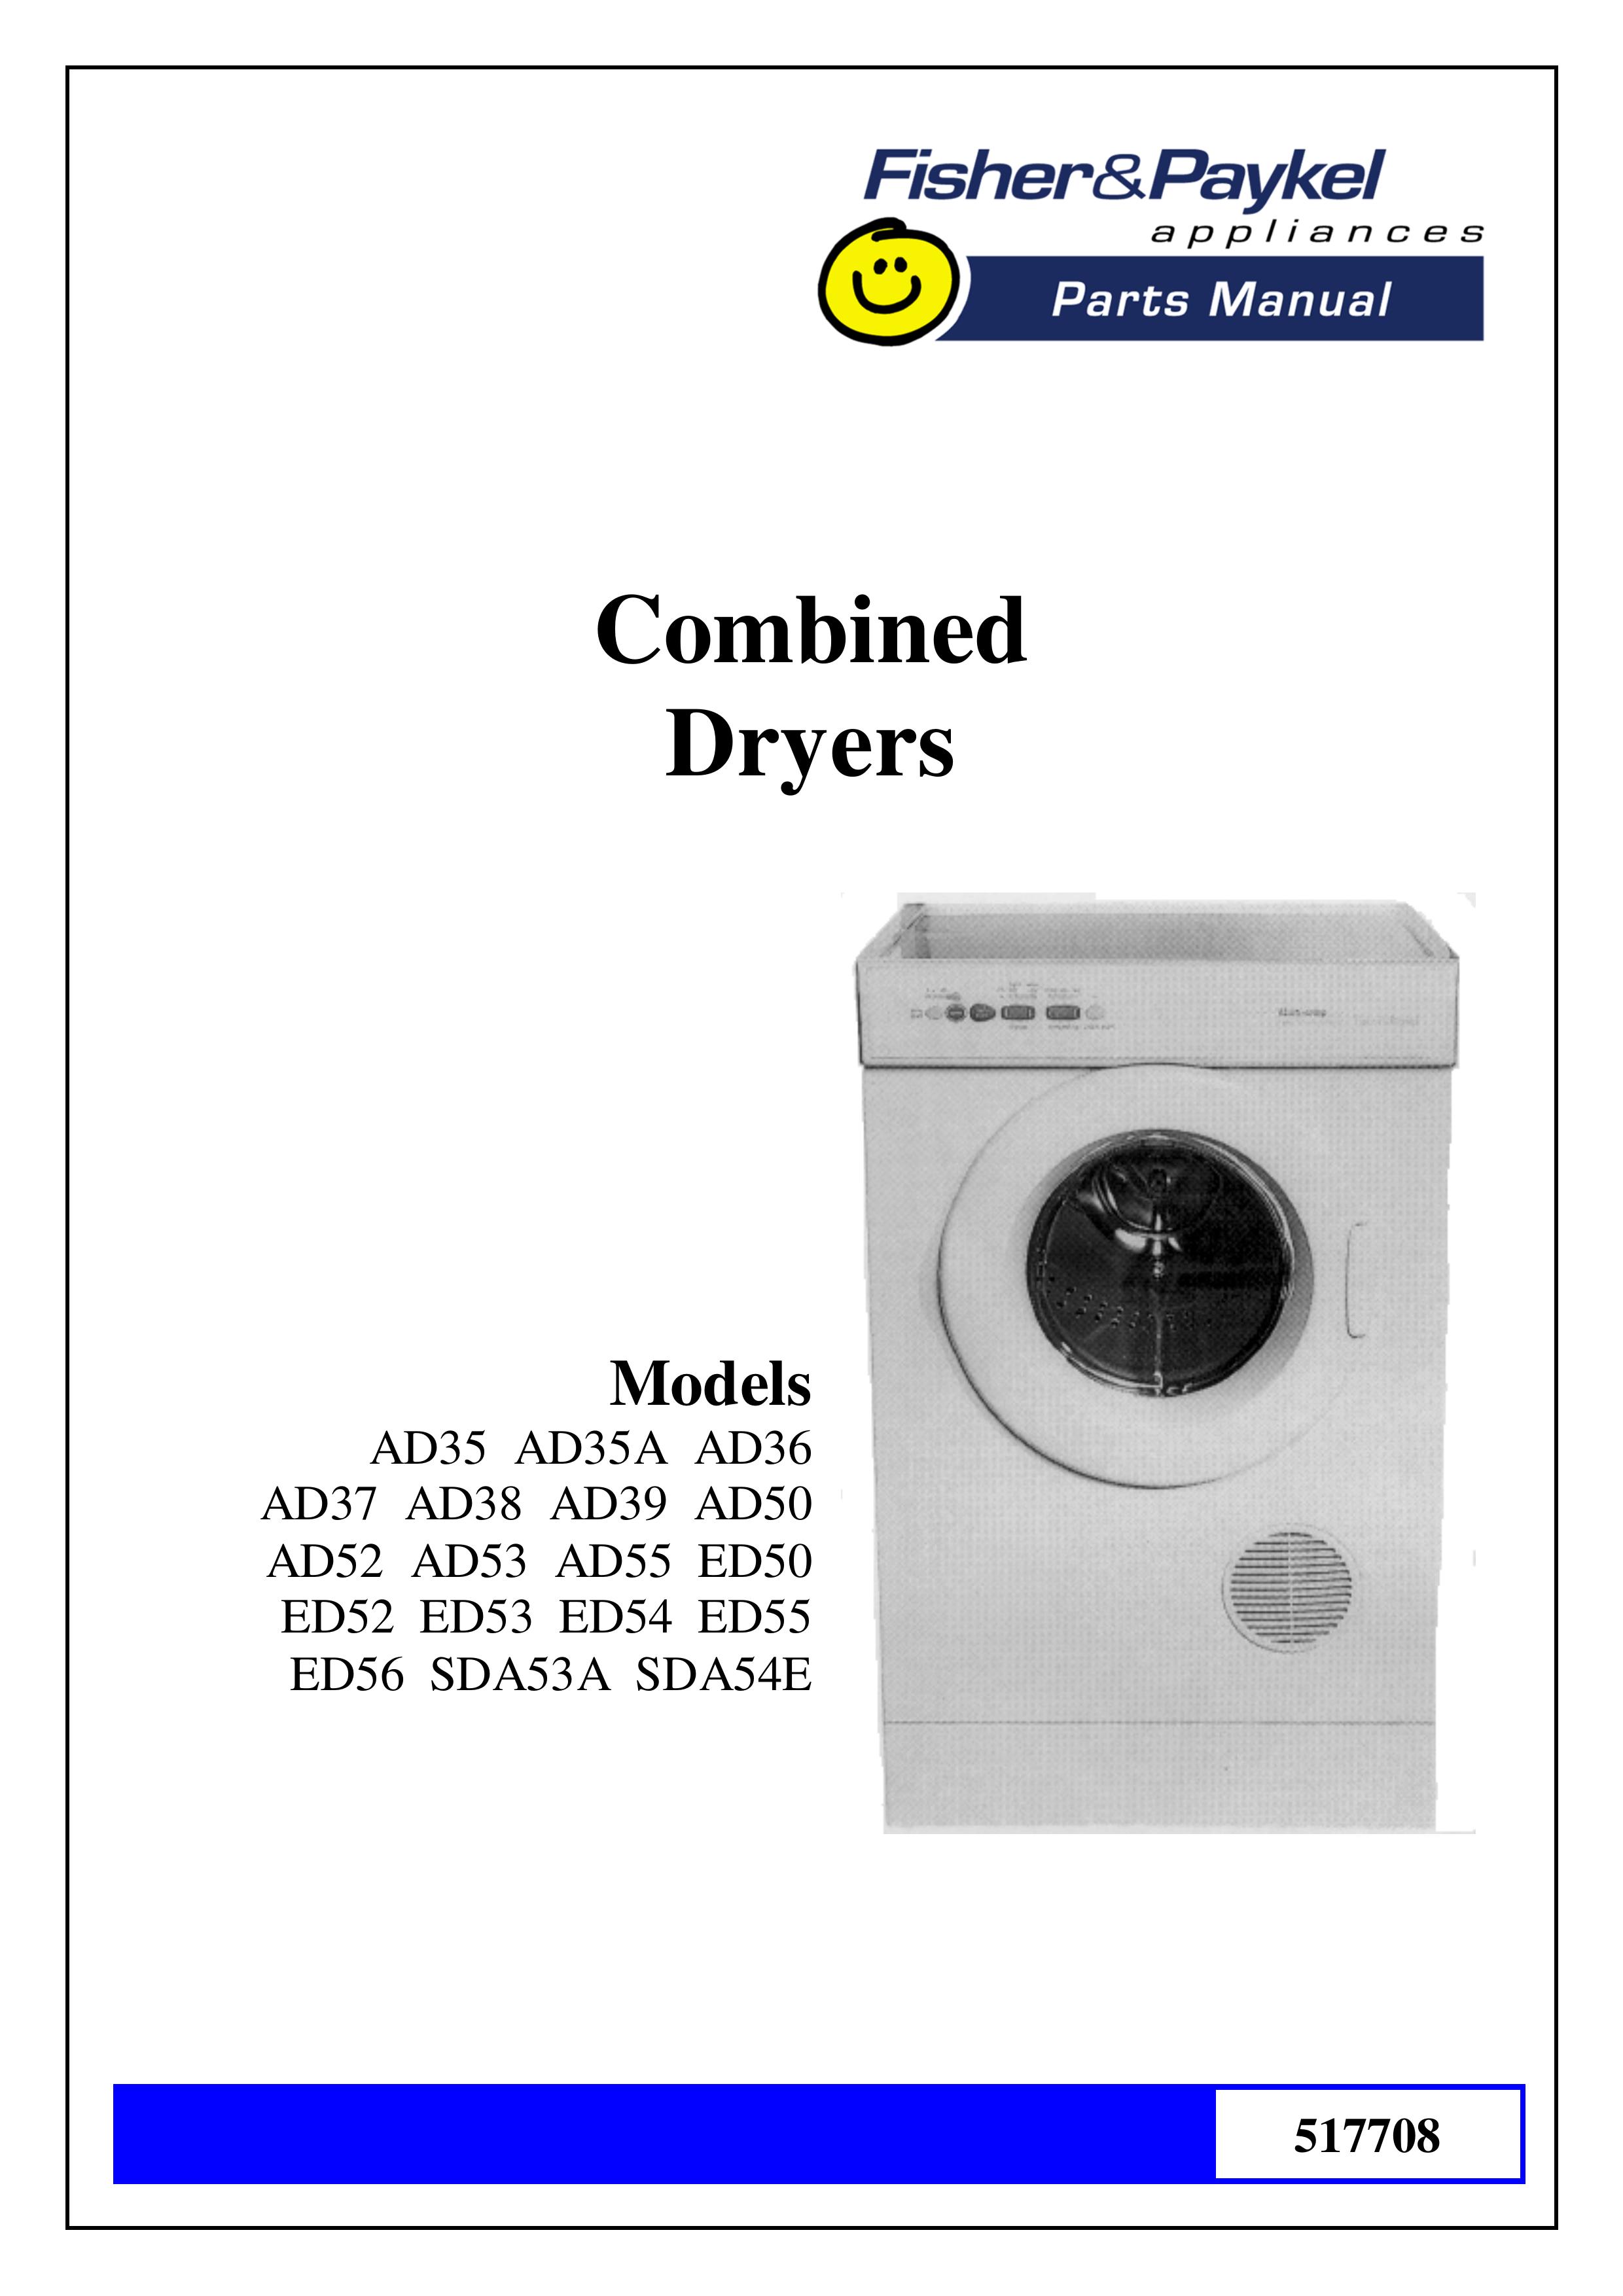 Fisher & Paykel SDA53A Clothes Dryer User Manual